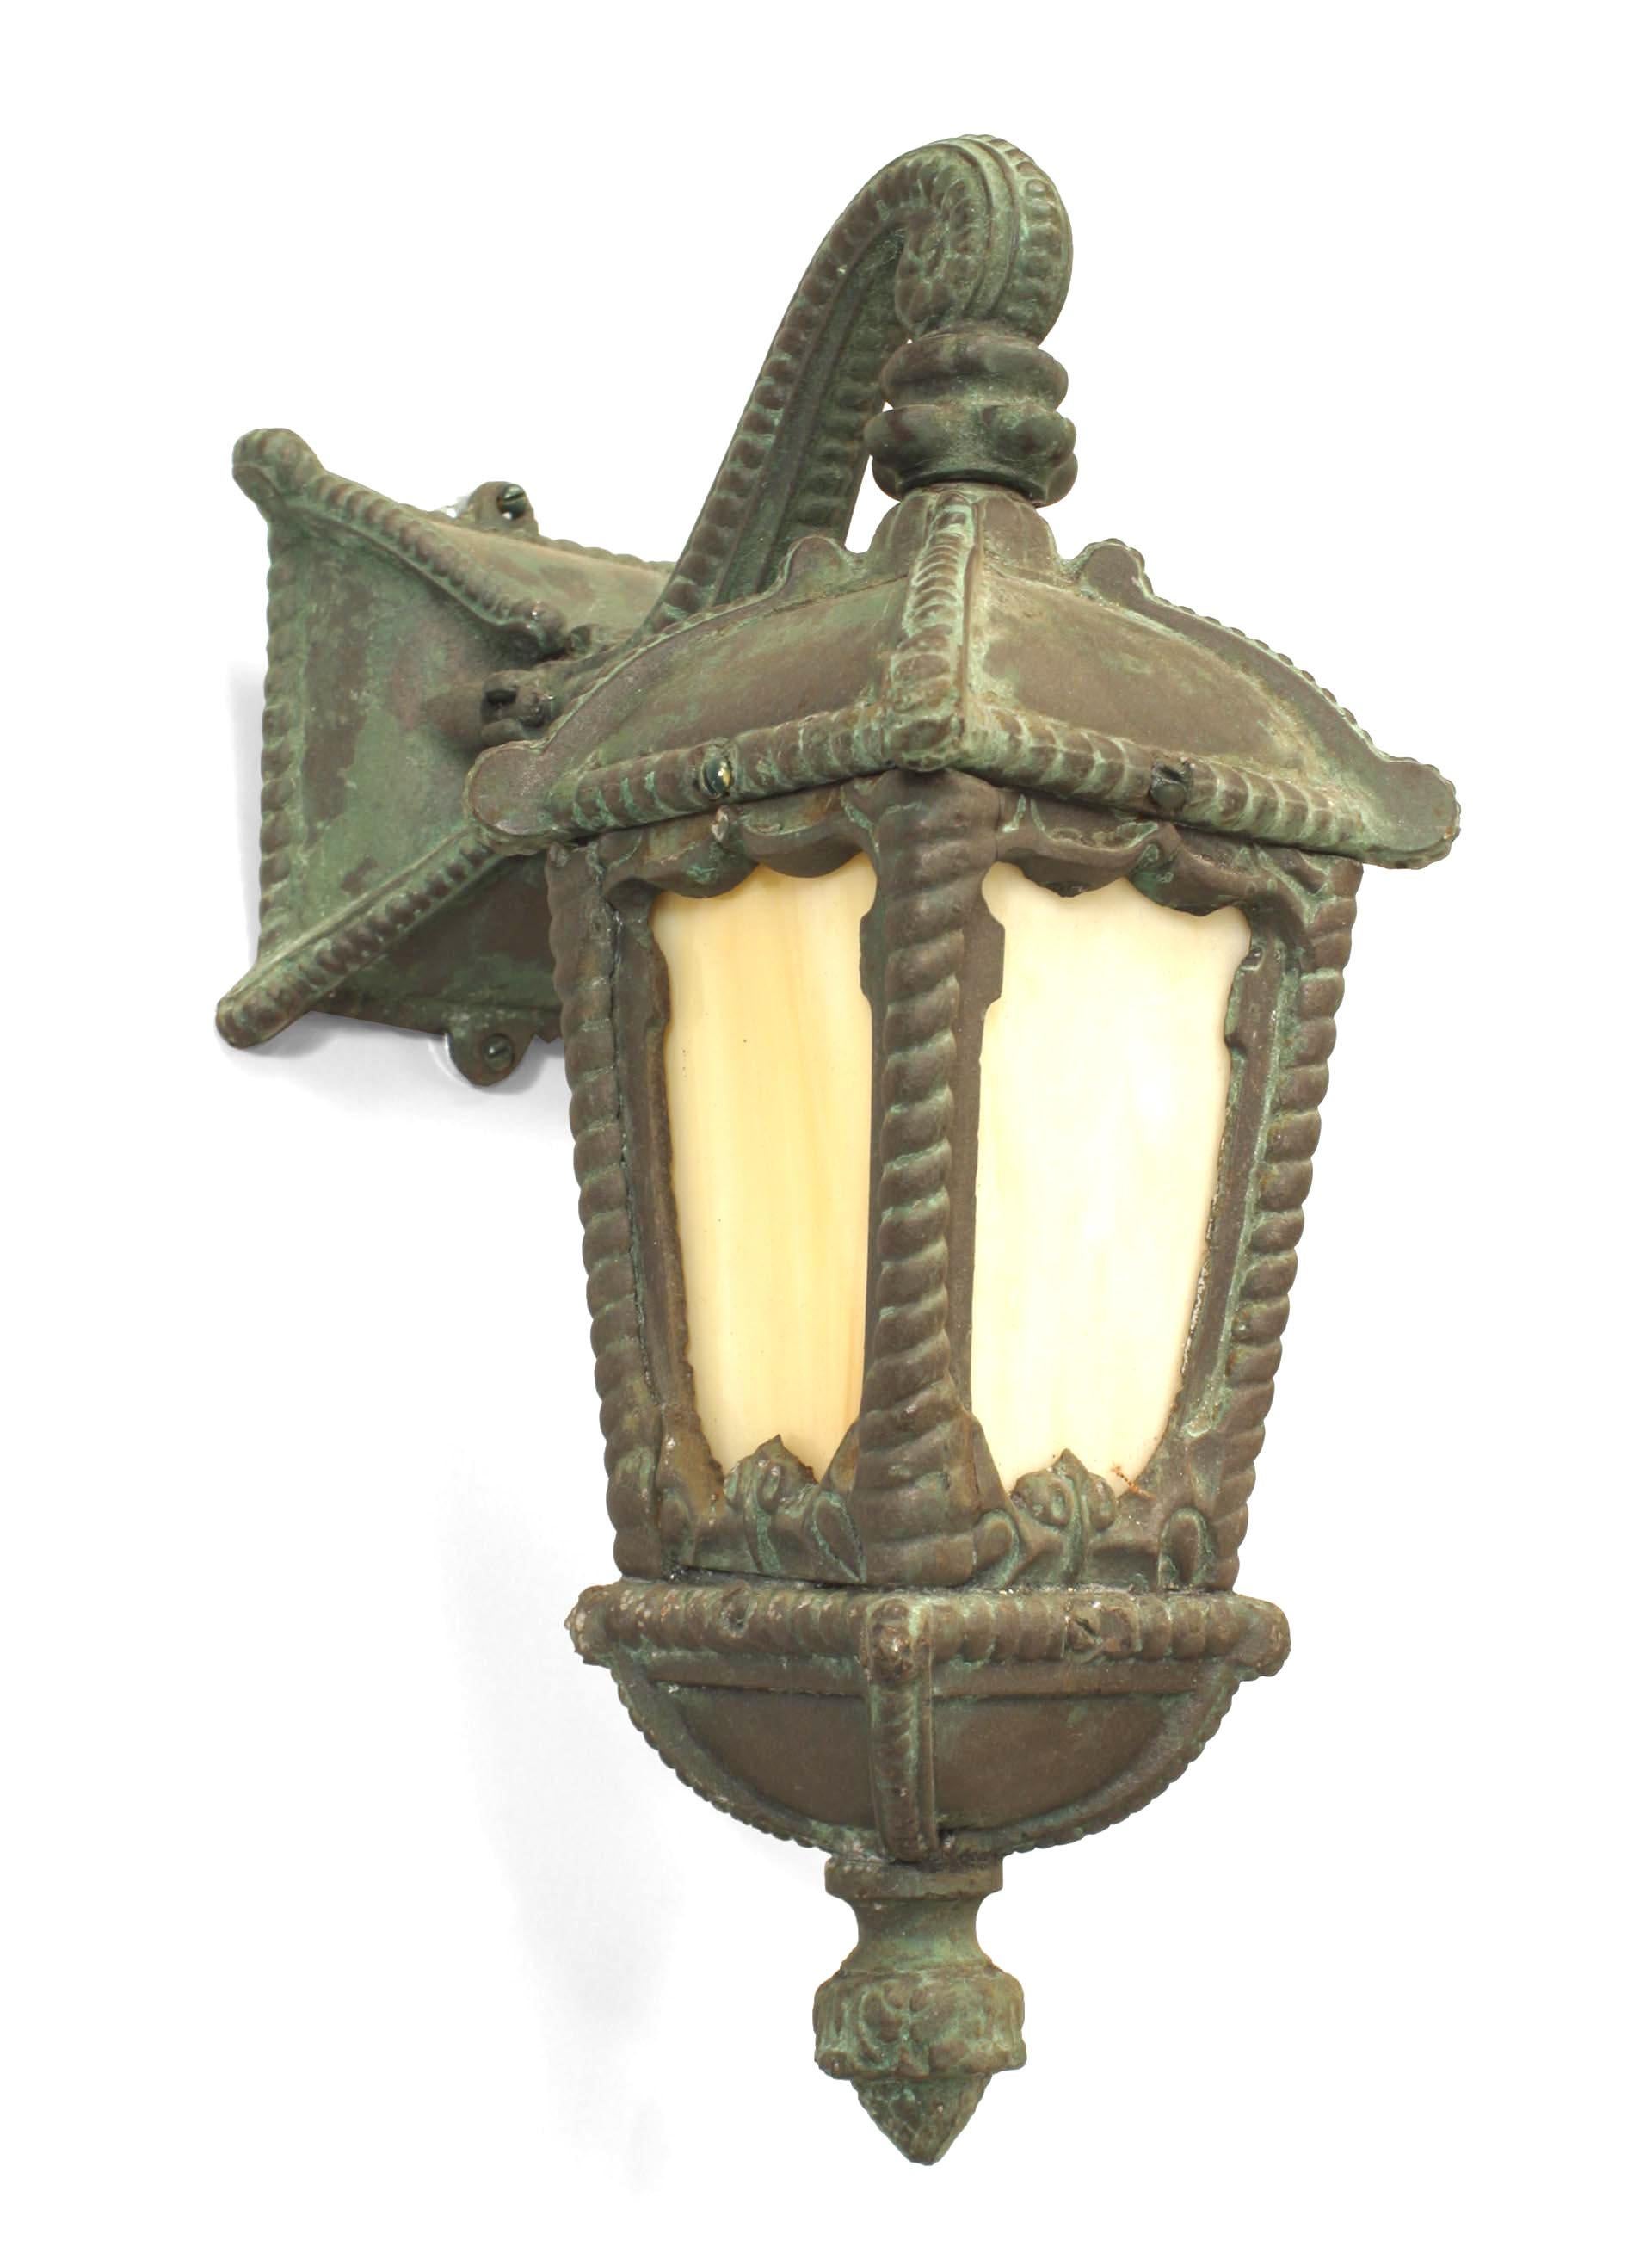 Pair of American Victorian green patinated iron outdoor wall sconces with rope trim and a scroll arm supporting a square lantern with four stained glass panels. (PRICED AS Pair) Two pairs are avaliable. One pair has different glass insets in a